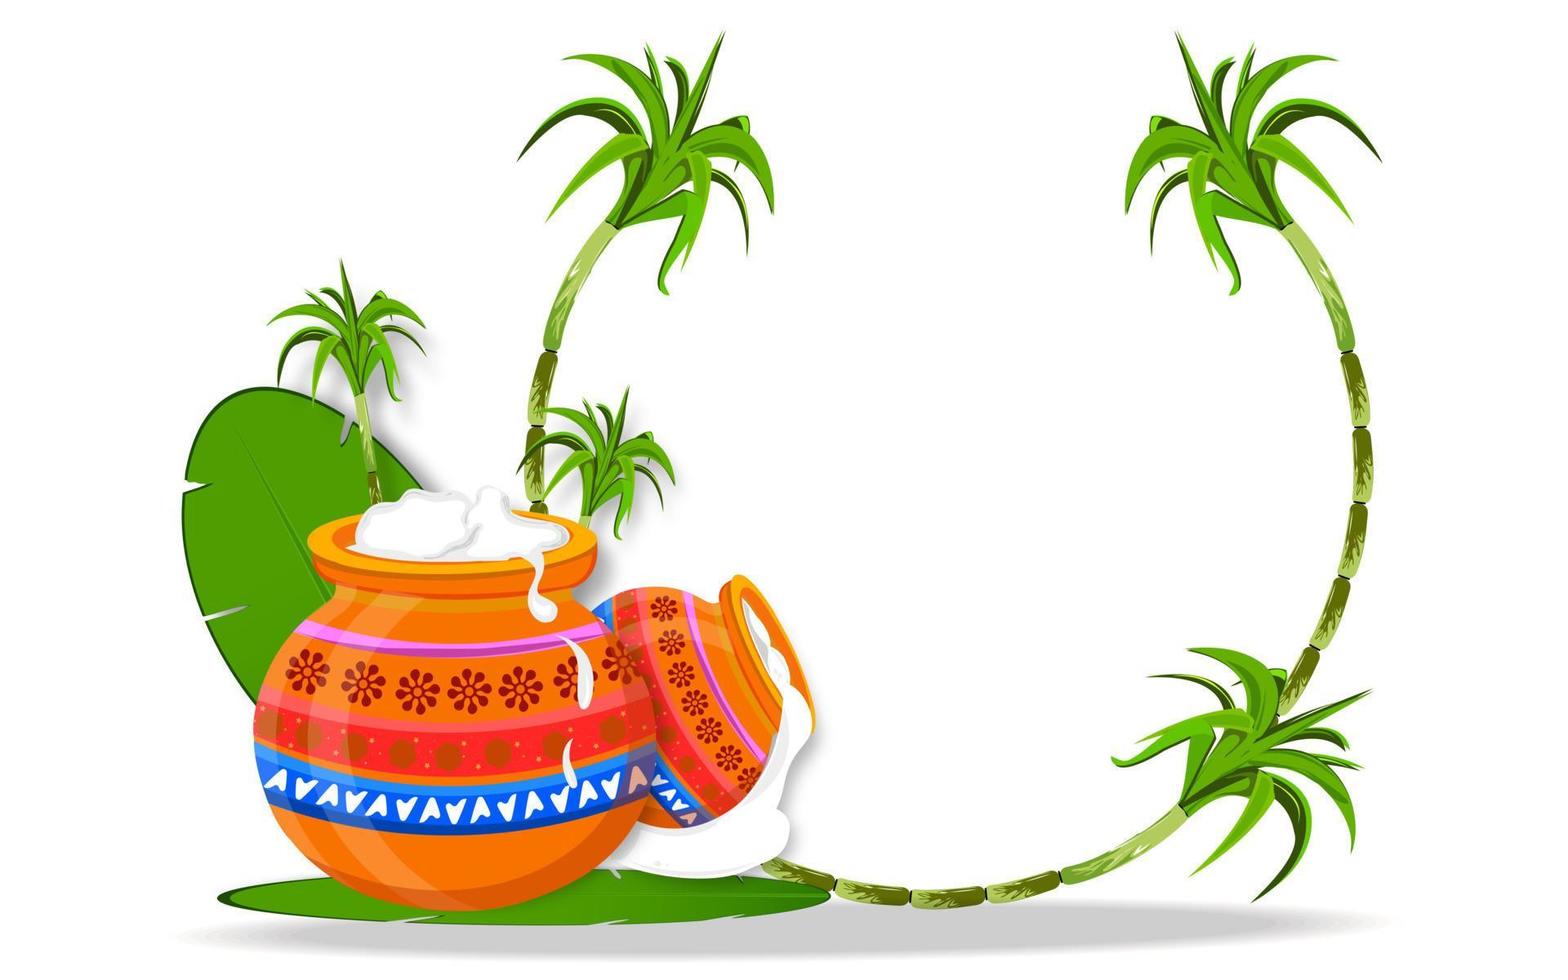 Illustration of beautiful Pongal pot and sugarcane on banana leaf for happy Pongal holiday harvest festival in South India. Sugarcane frame vector